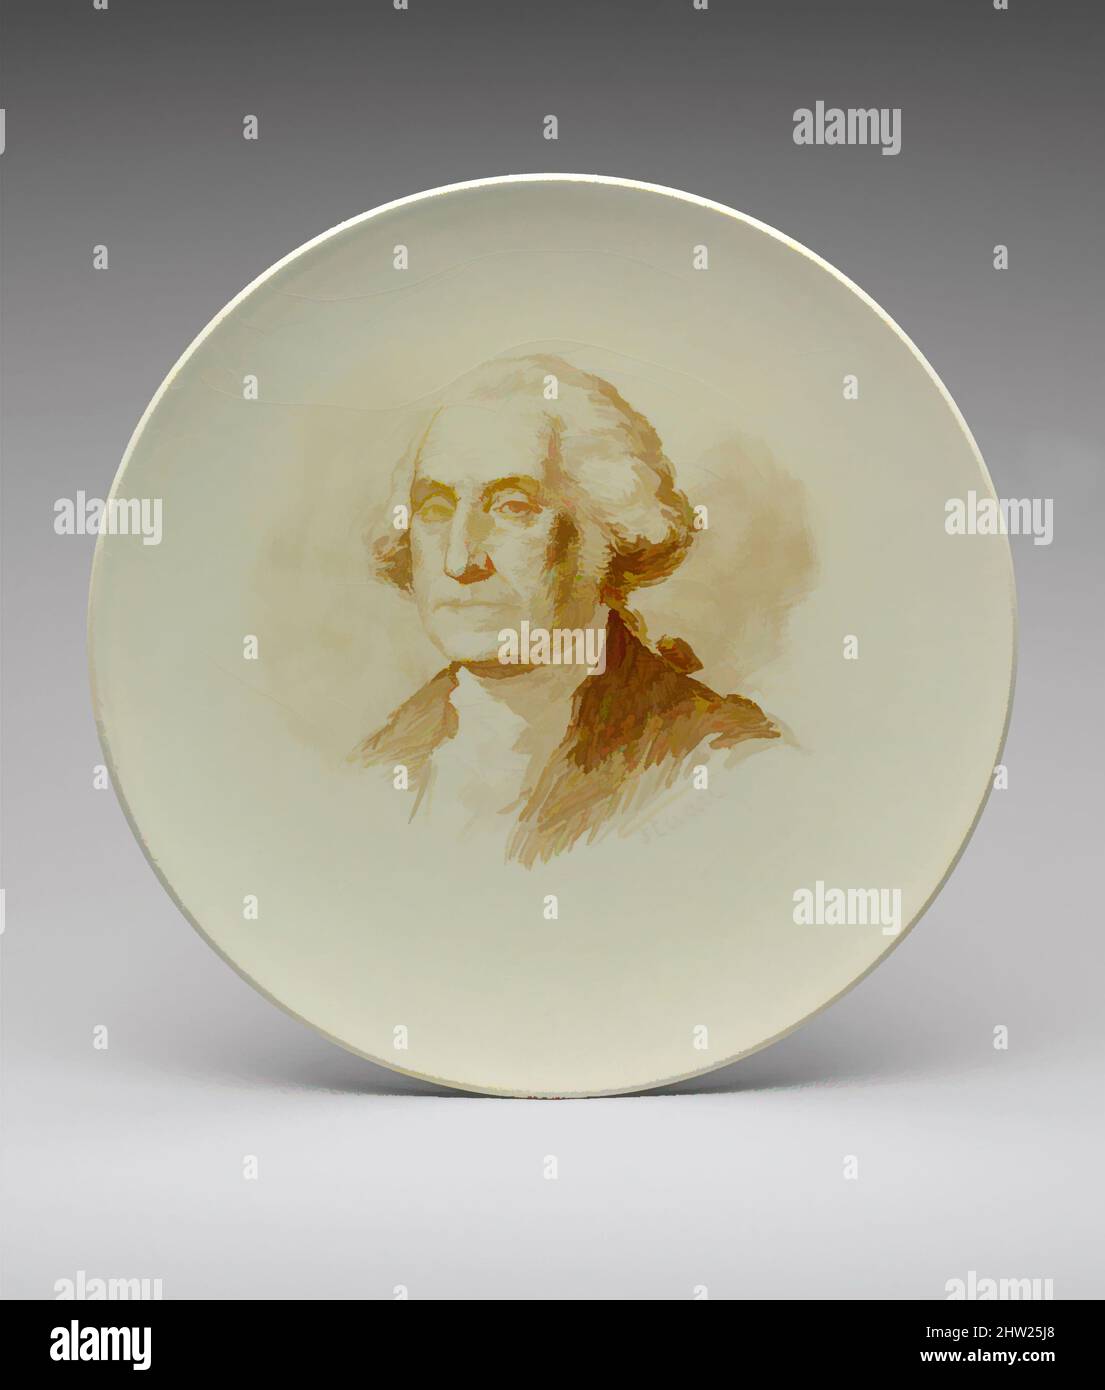 Art inspired by George Washington, 1840–83, Made in France, French, Faience, Diam. 8 3/4 in. (22.2 cm), Ceramics, After Gilbert Stuart (American, North Kingston, Rhode Island 1755–1828 Boston, Massachusetts, Classic works modernized by Artotop with a splash of modernity. Shapes, color and value, eye-catching visual impact on art. Emotions through freedom of artworks in a contemporary way. A timeless message pursuing a wildly creative new direction. Artists turning to the digital medium and creating the Artotop NFT Stock Photo